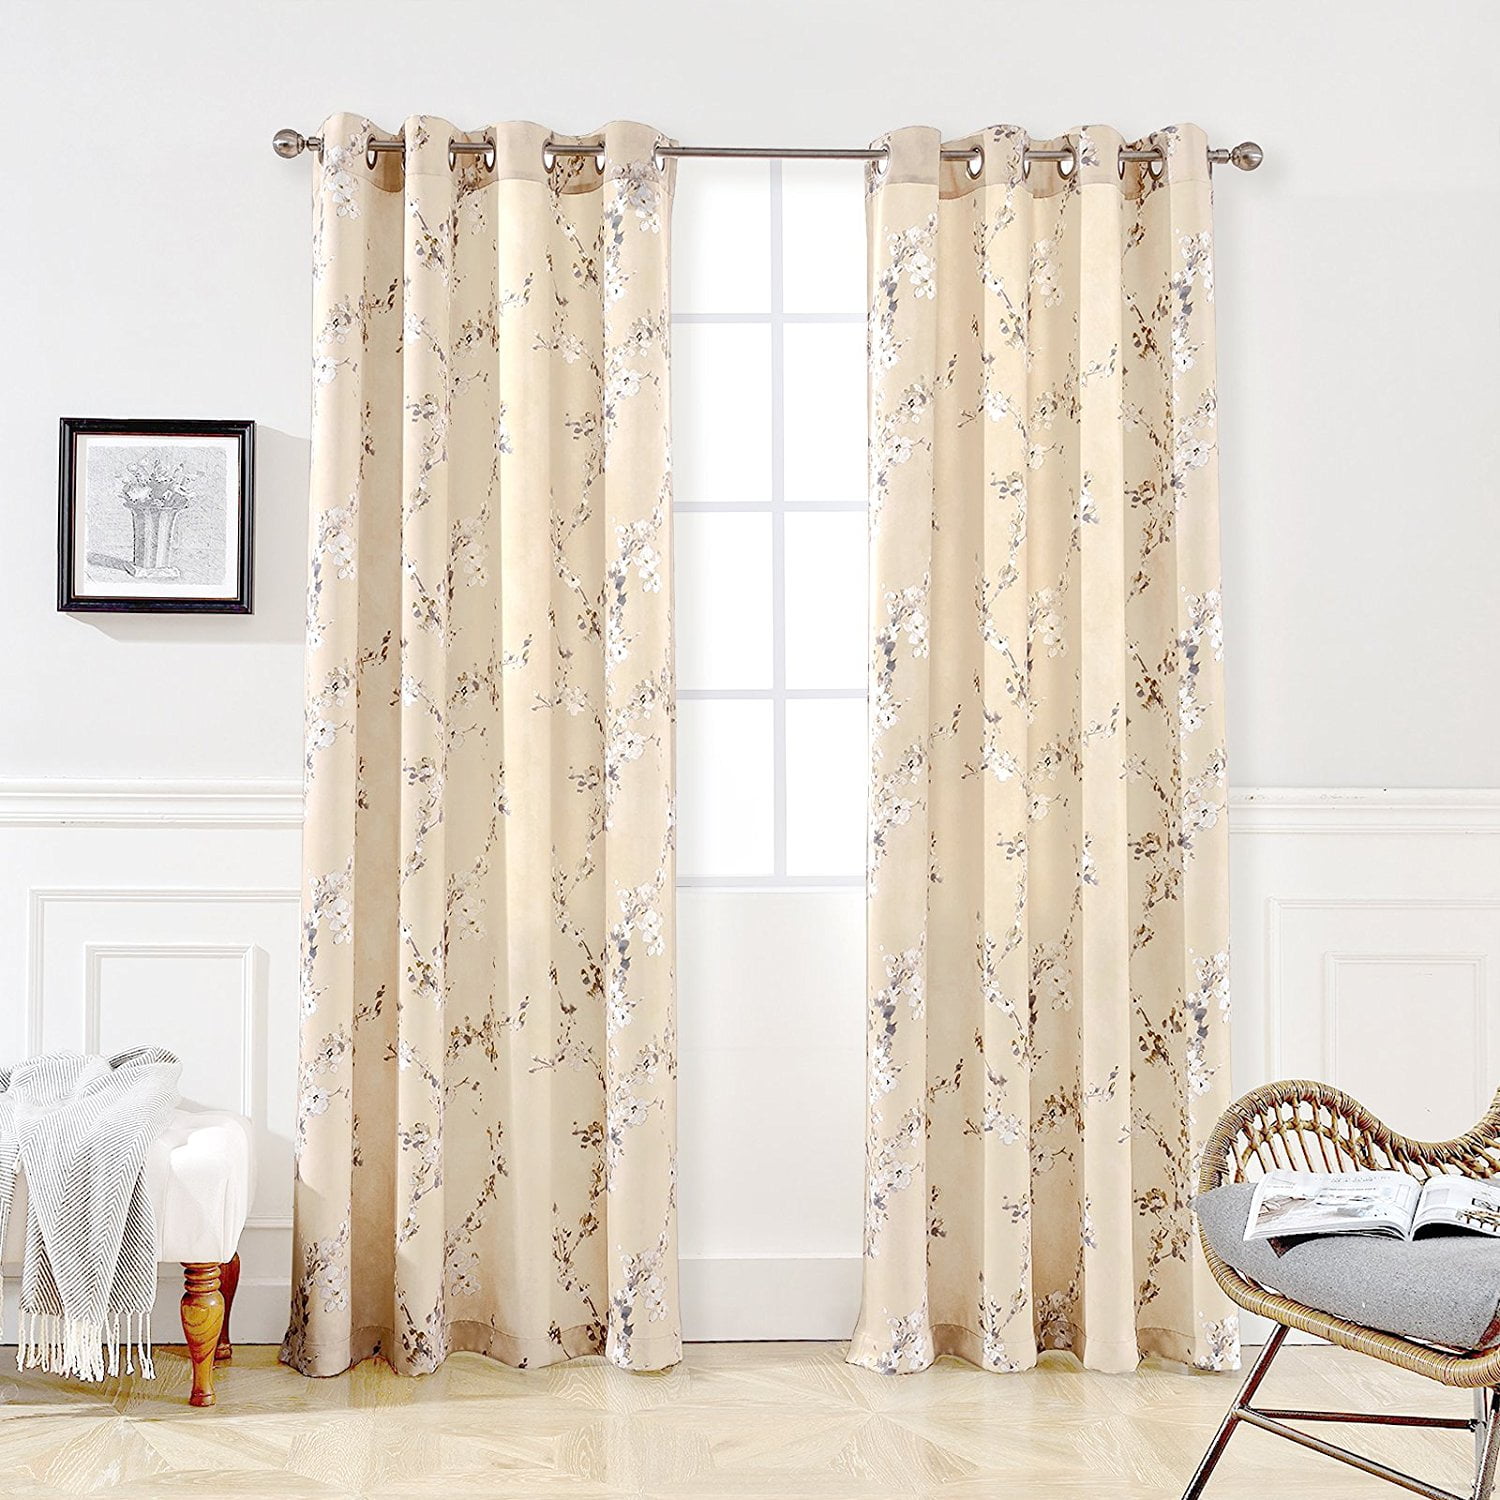 2 Panel Eyelet Butterfly Anti-UV Thermal Blackout 3D Animal Print Curtains 